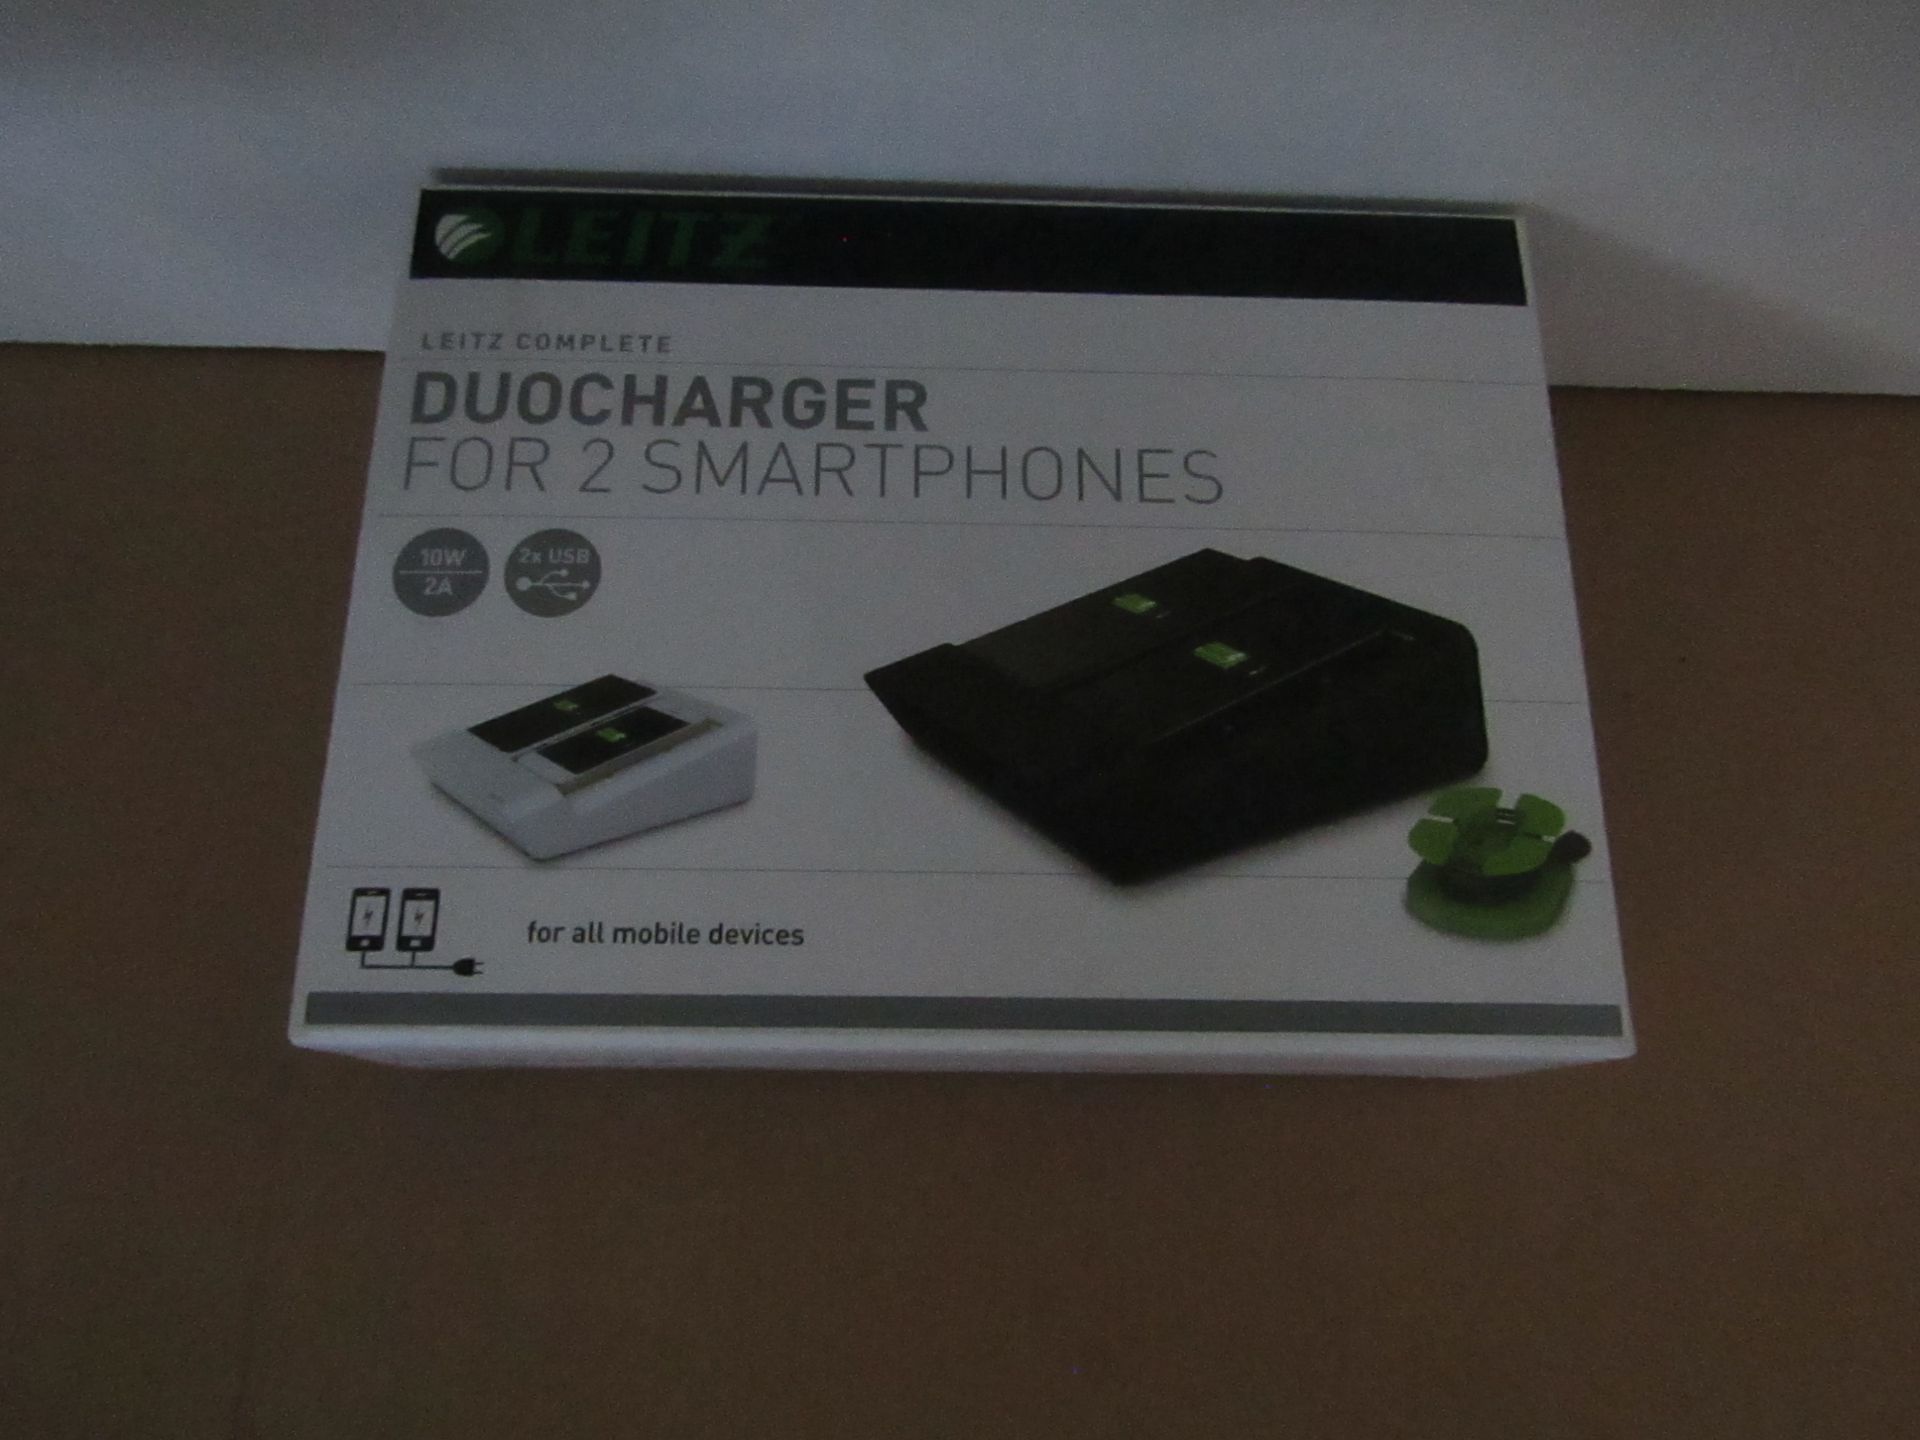 Leitz - DuoCharger For 2-Smartphones ( Black ) - New & Boxed.